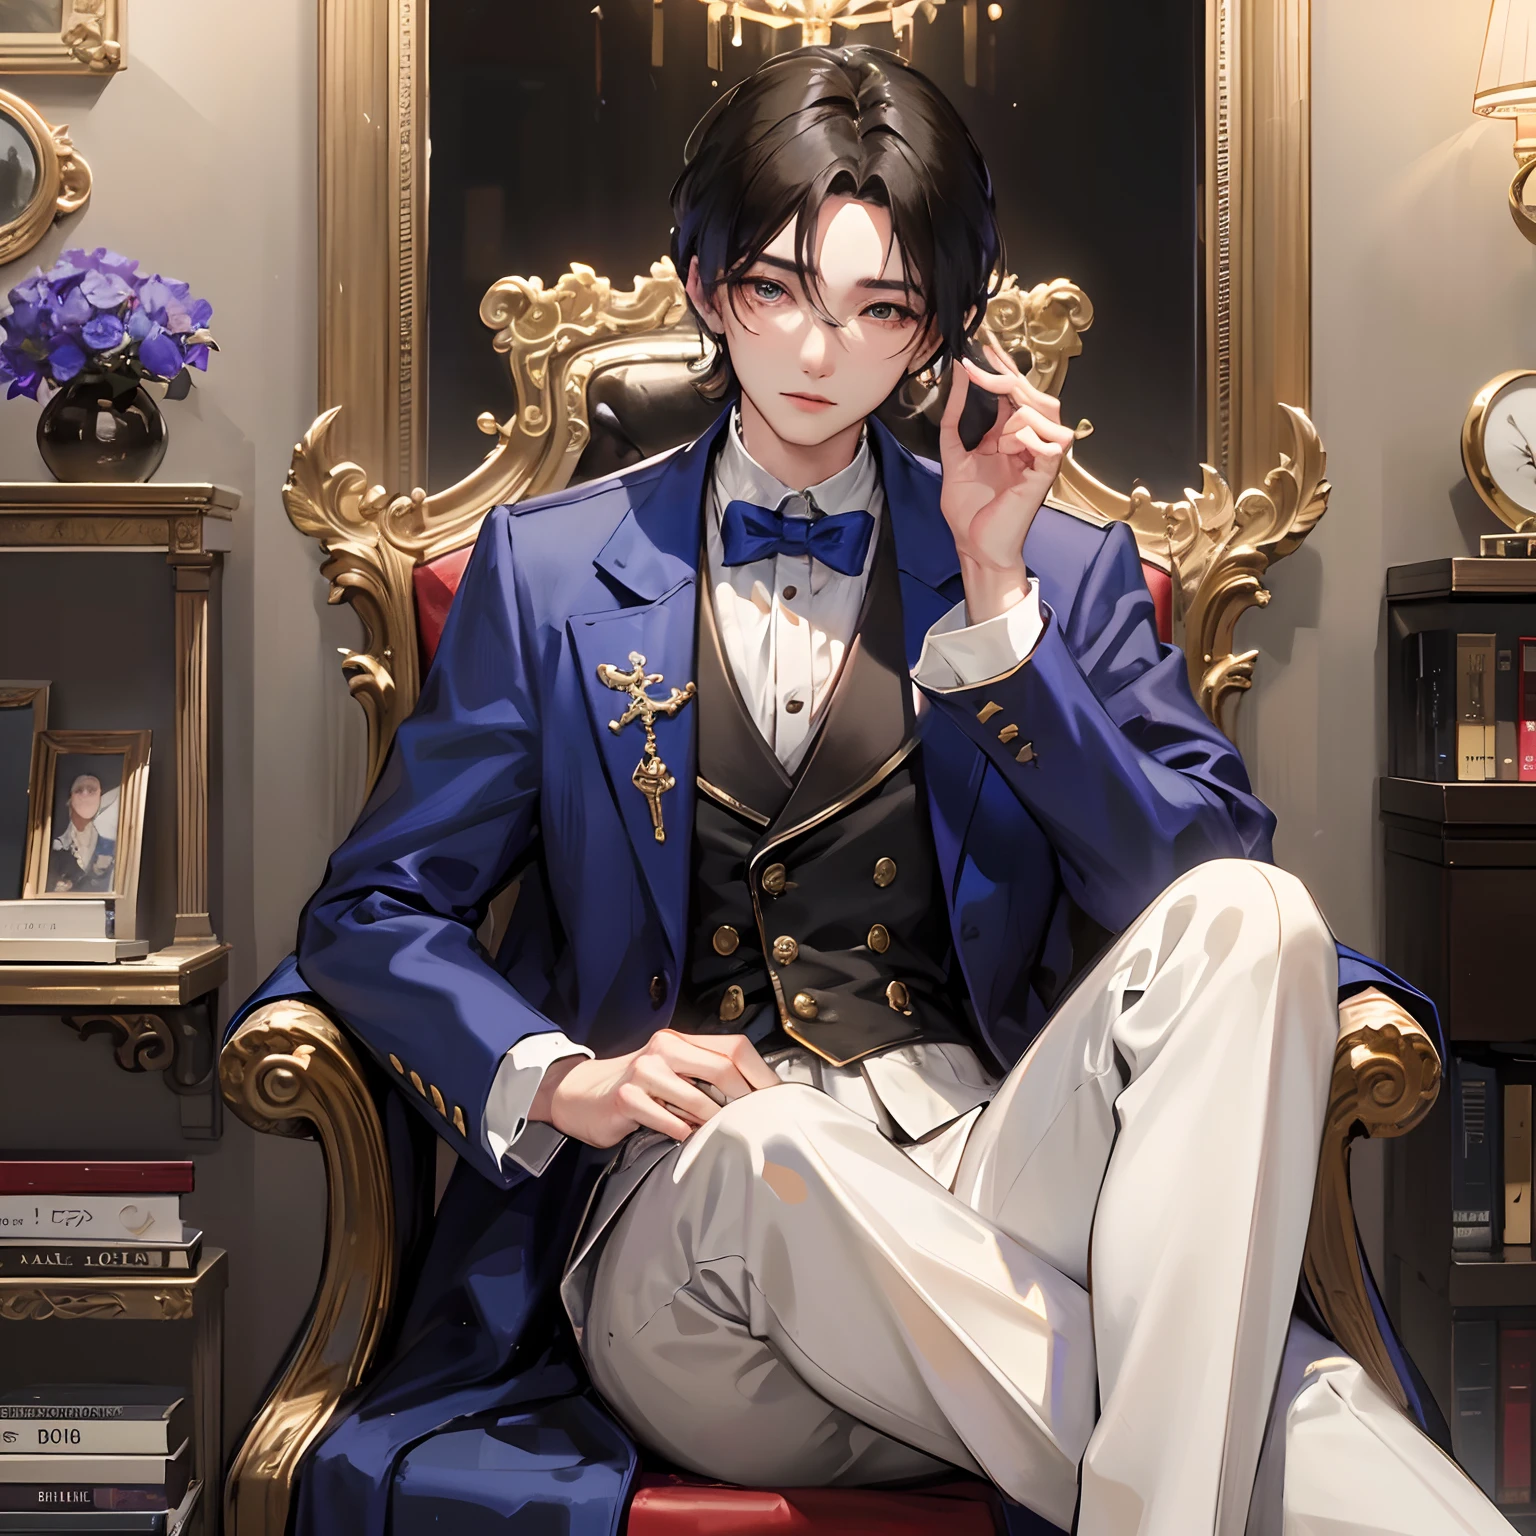 Adonis、Boy with black hair、Straight face、A detailed face、1 boy、Classic、Arrogant man、top grade、Center division、Forehead、Mole、One Man、glamor、Music、noble、nobles、Very beautiful man、Music、Beautiful clothes、blue clothing、Holding sheet music in hand、Long coat、plushies、『IdentityV fifth personality』